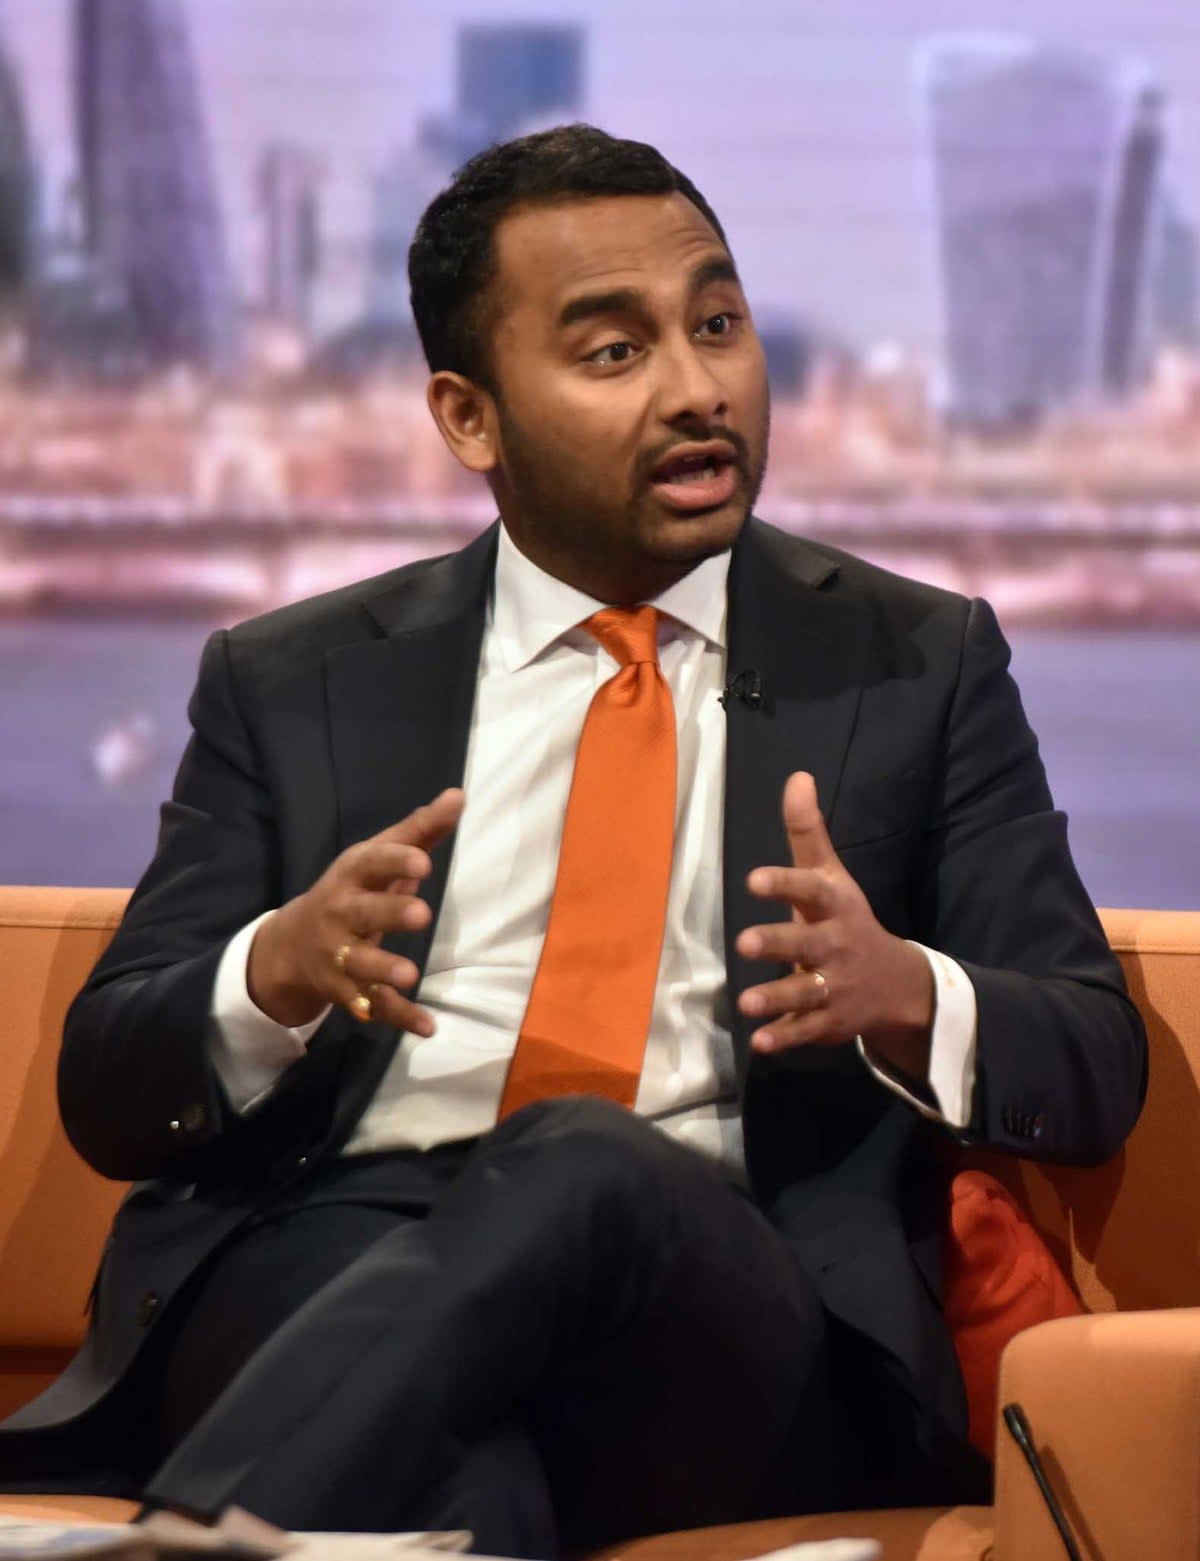 Amol Rajan became the youngest editor of a broadsheet newspaper in Britain when he was made editor of The Independent in 2013 at the age of 29 (Jeff Overs/BBC/PA) (PA Media)